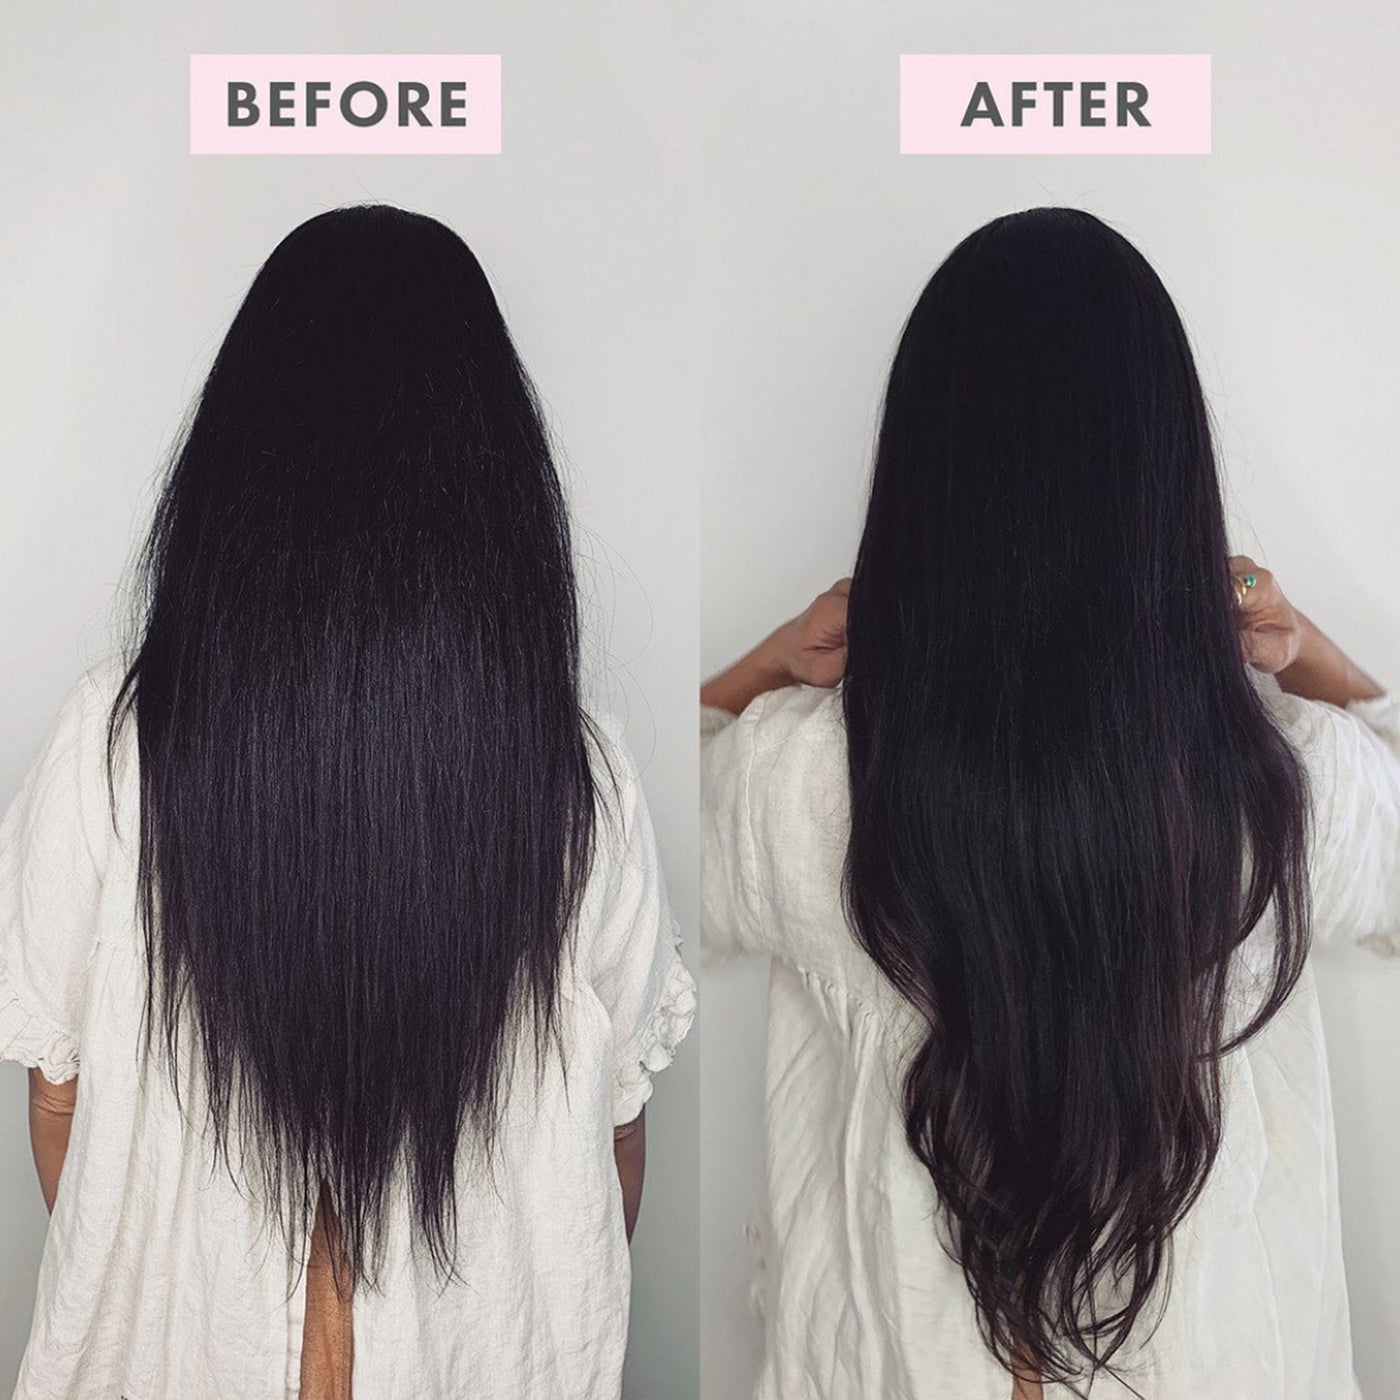 BondiBoost Hair Growth Conditioner (1 Litre) before and after use